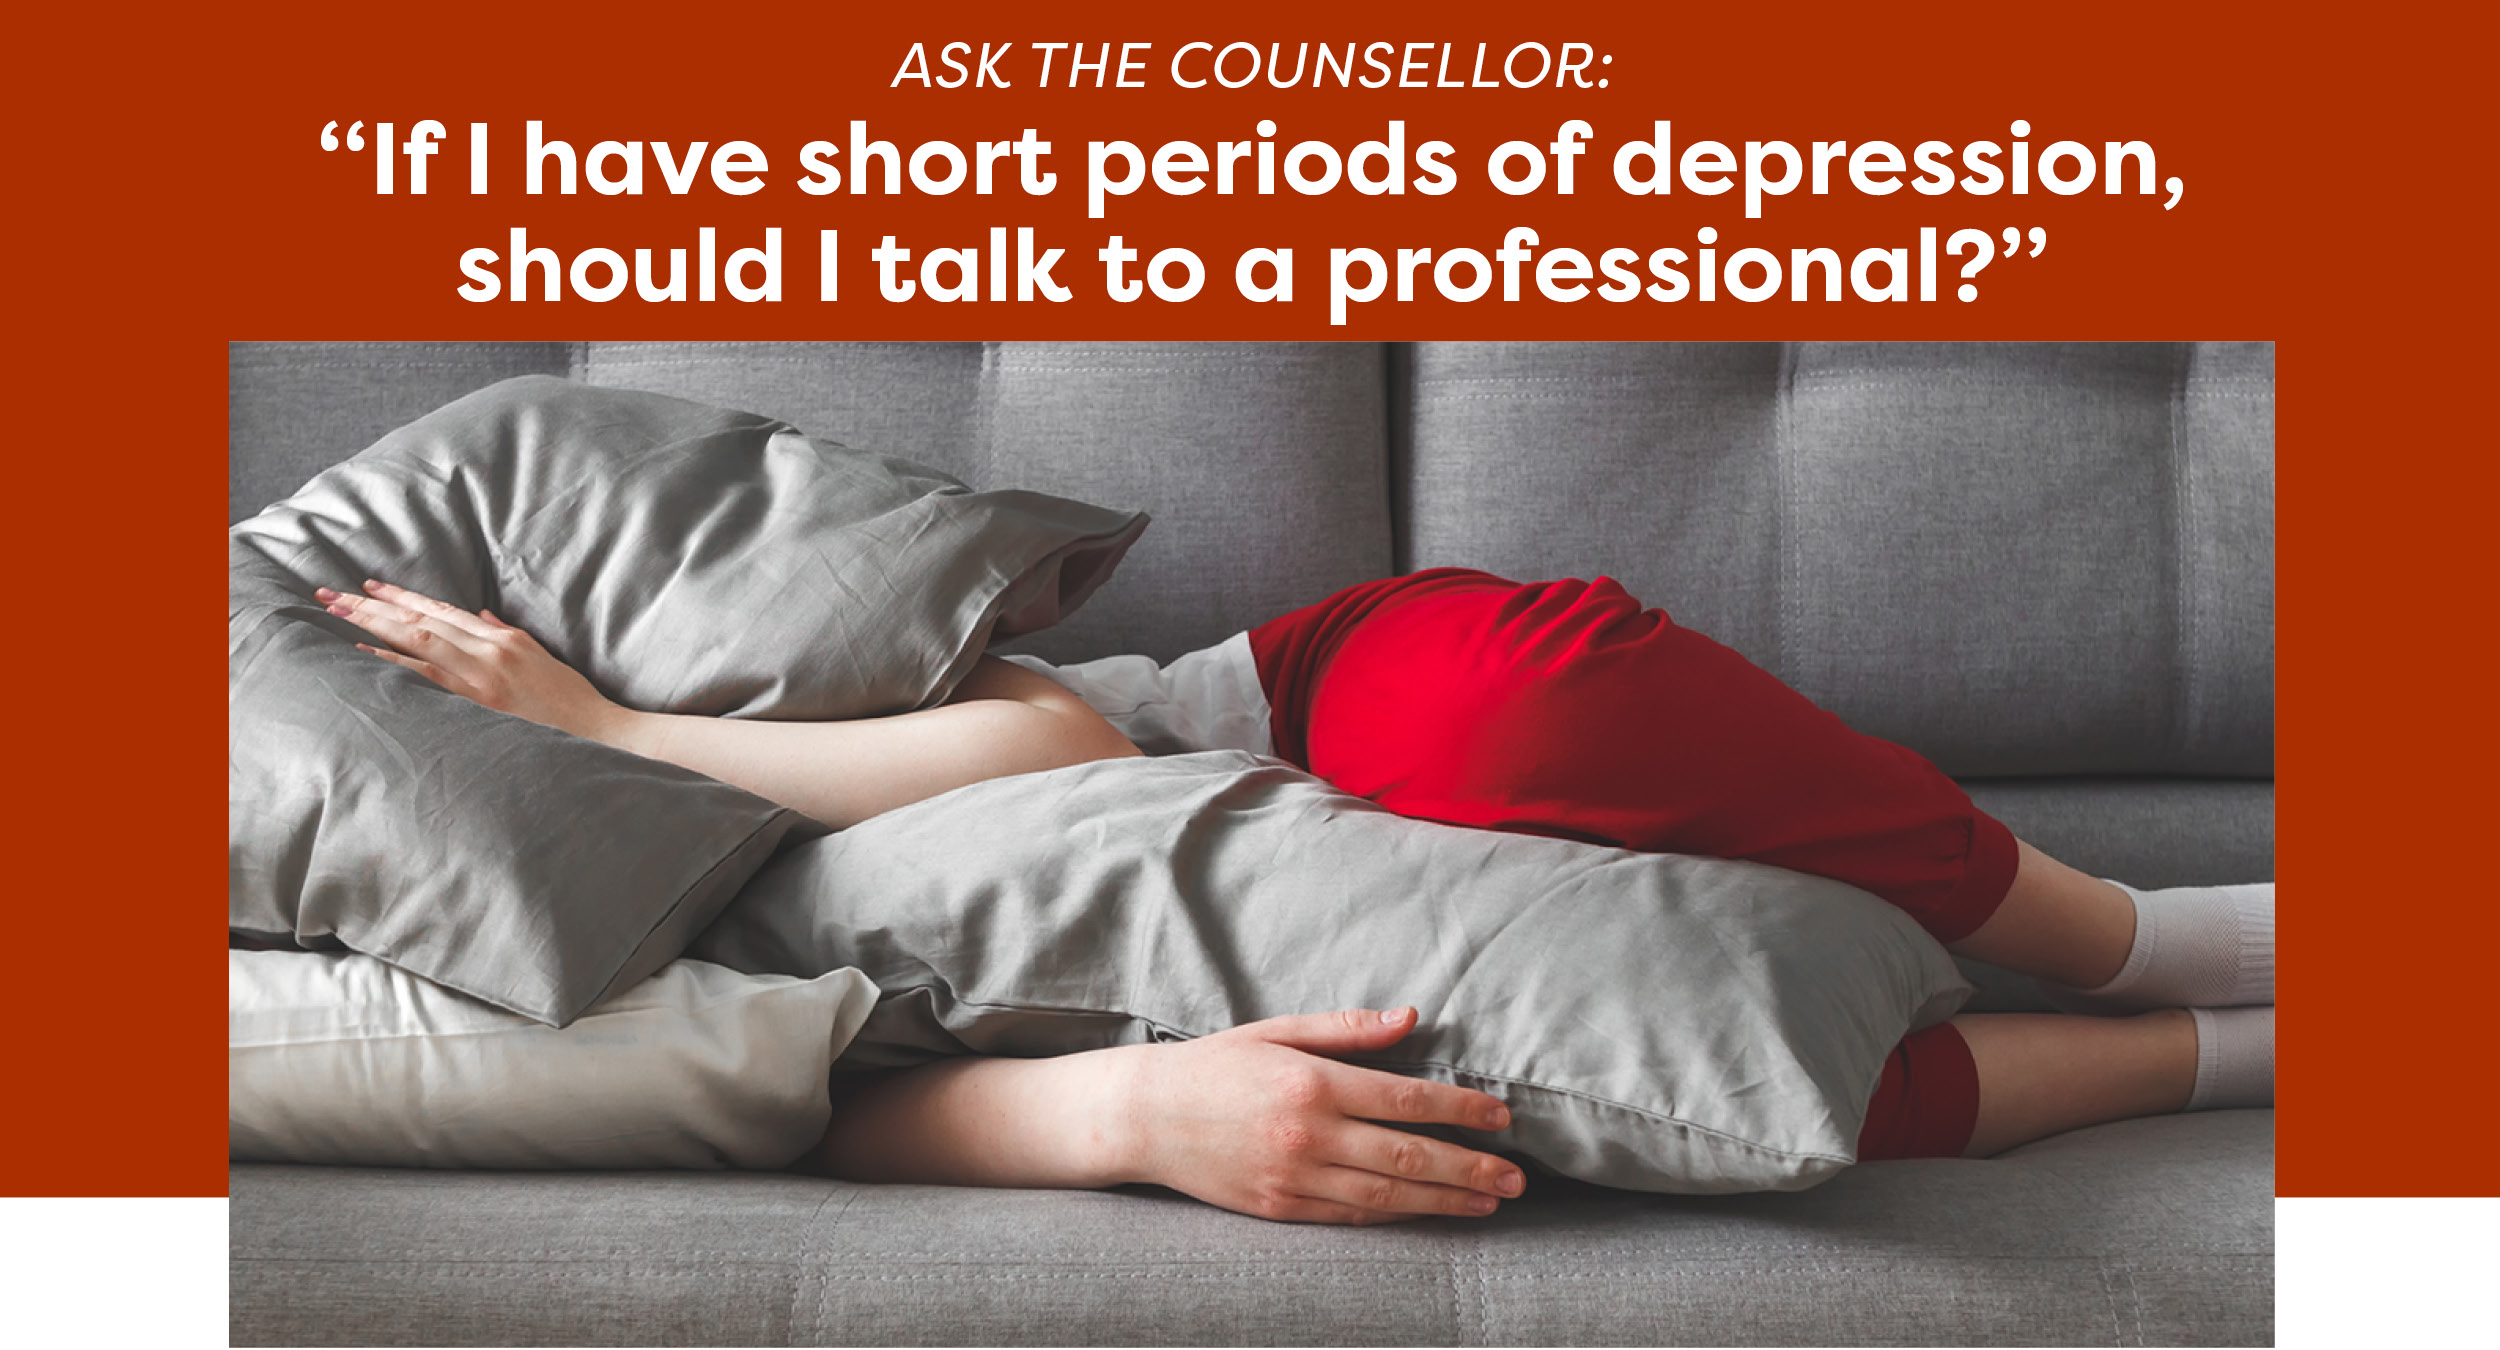 Ask the counsellor: “If I have short periods of depression, should I talk to a professional?”